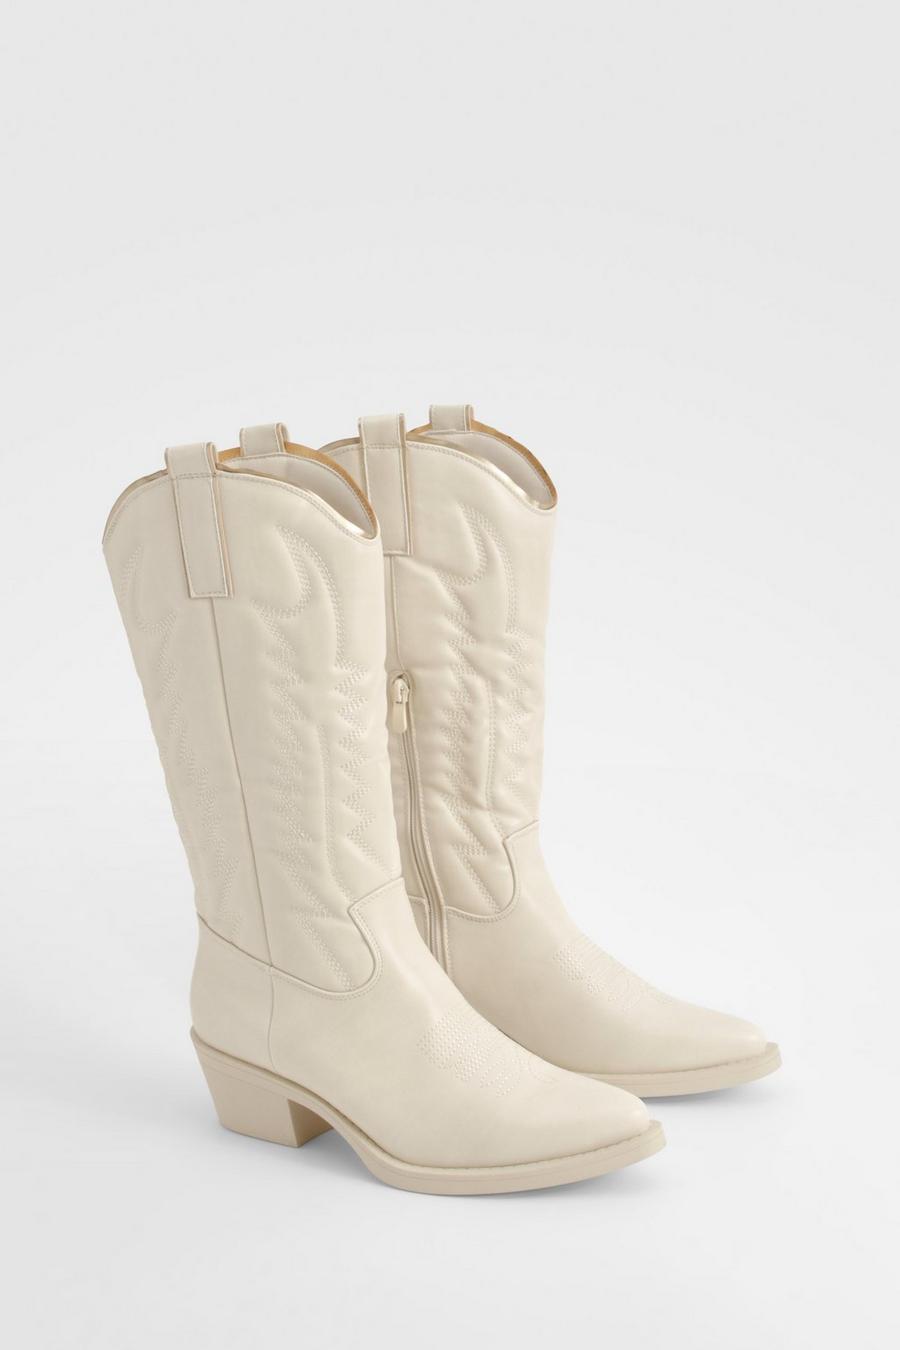 Cream Metallic Trim Embroidered Calf High Western Boots image number 1